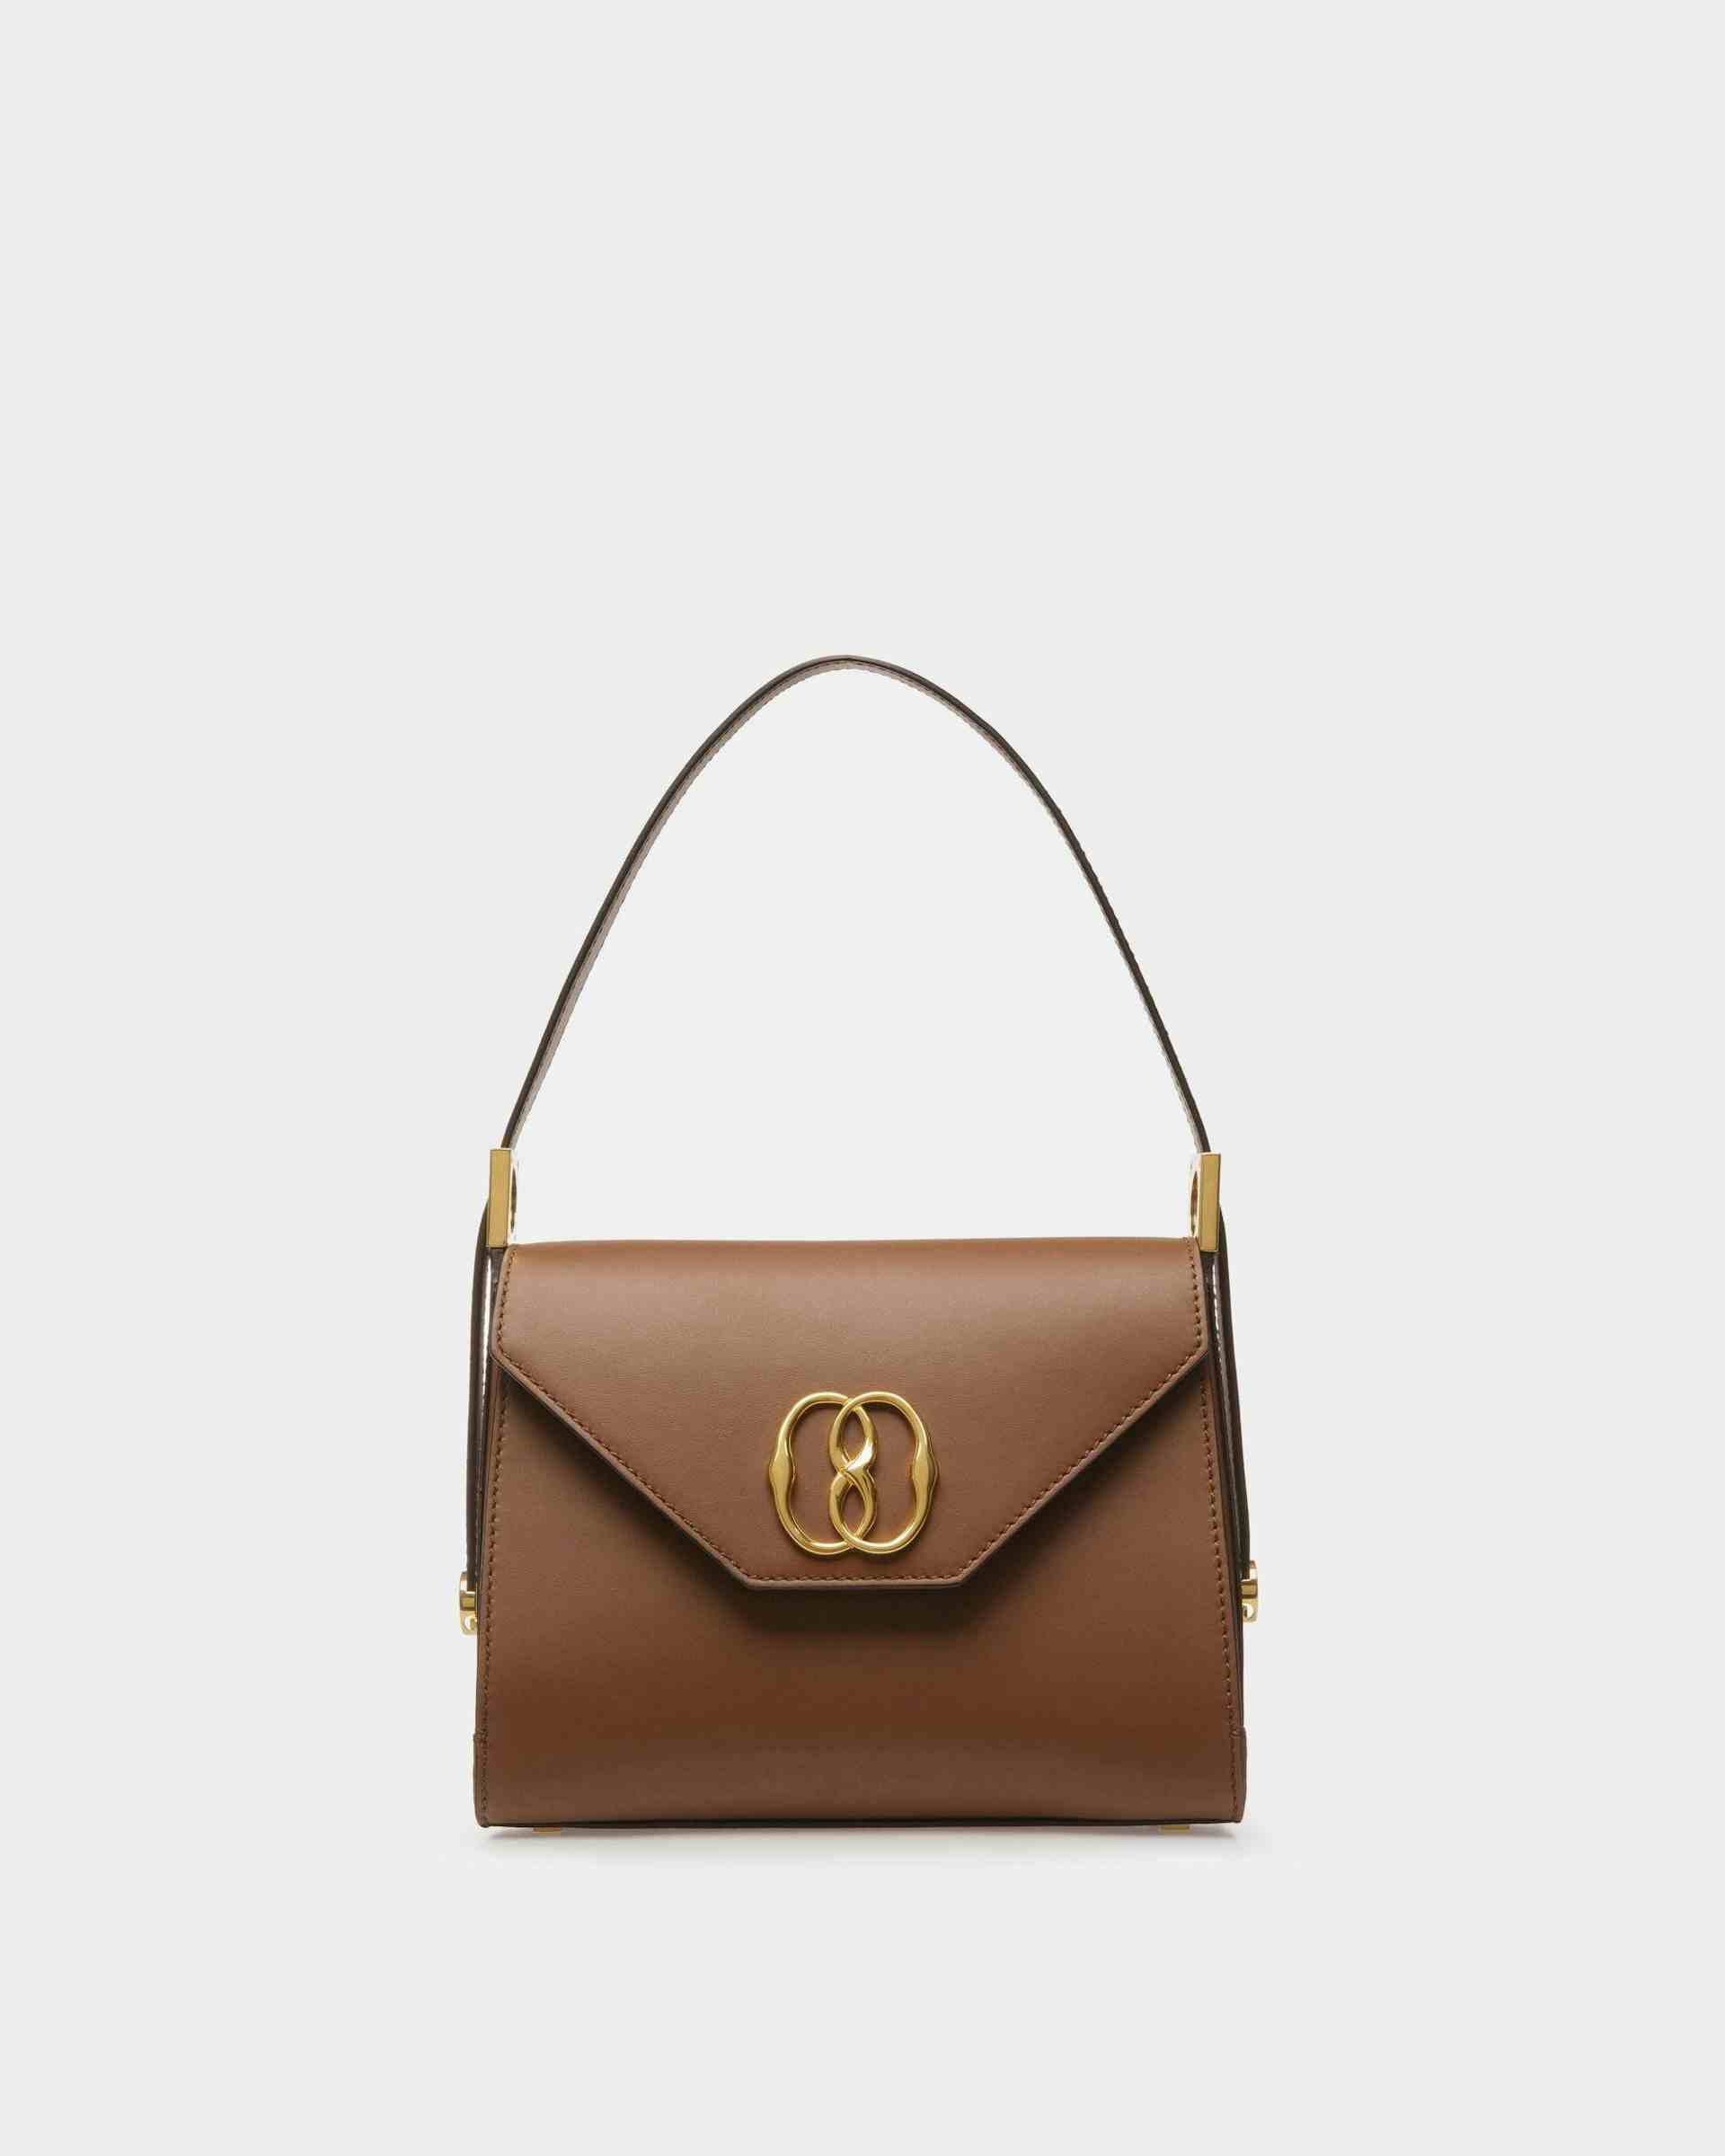 Emblem Top Handle Bag In Brown Leather - Femme - Bally